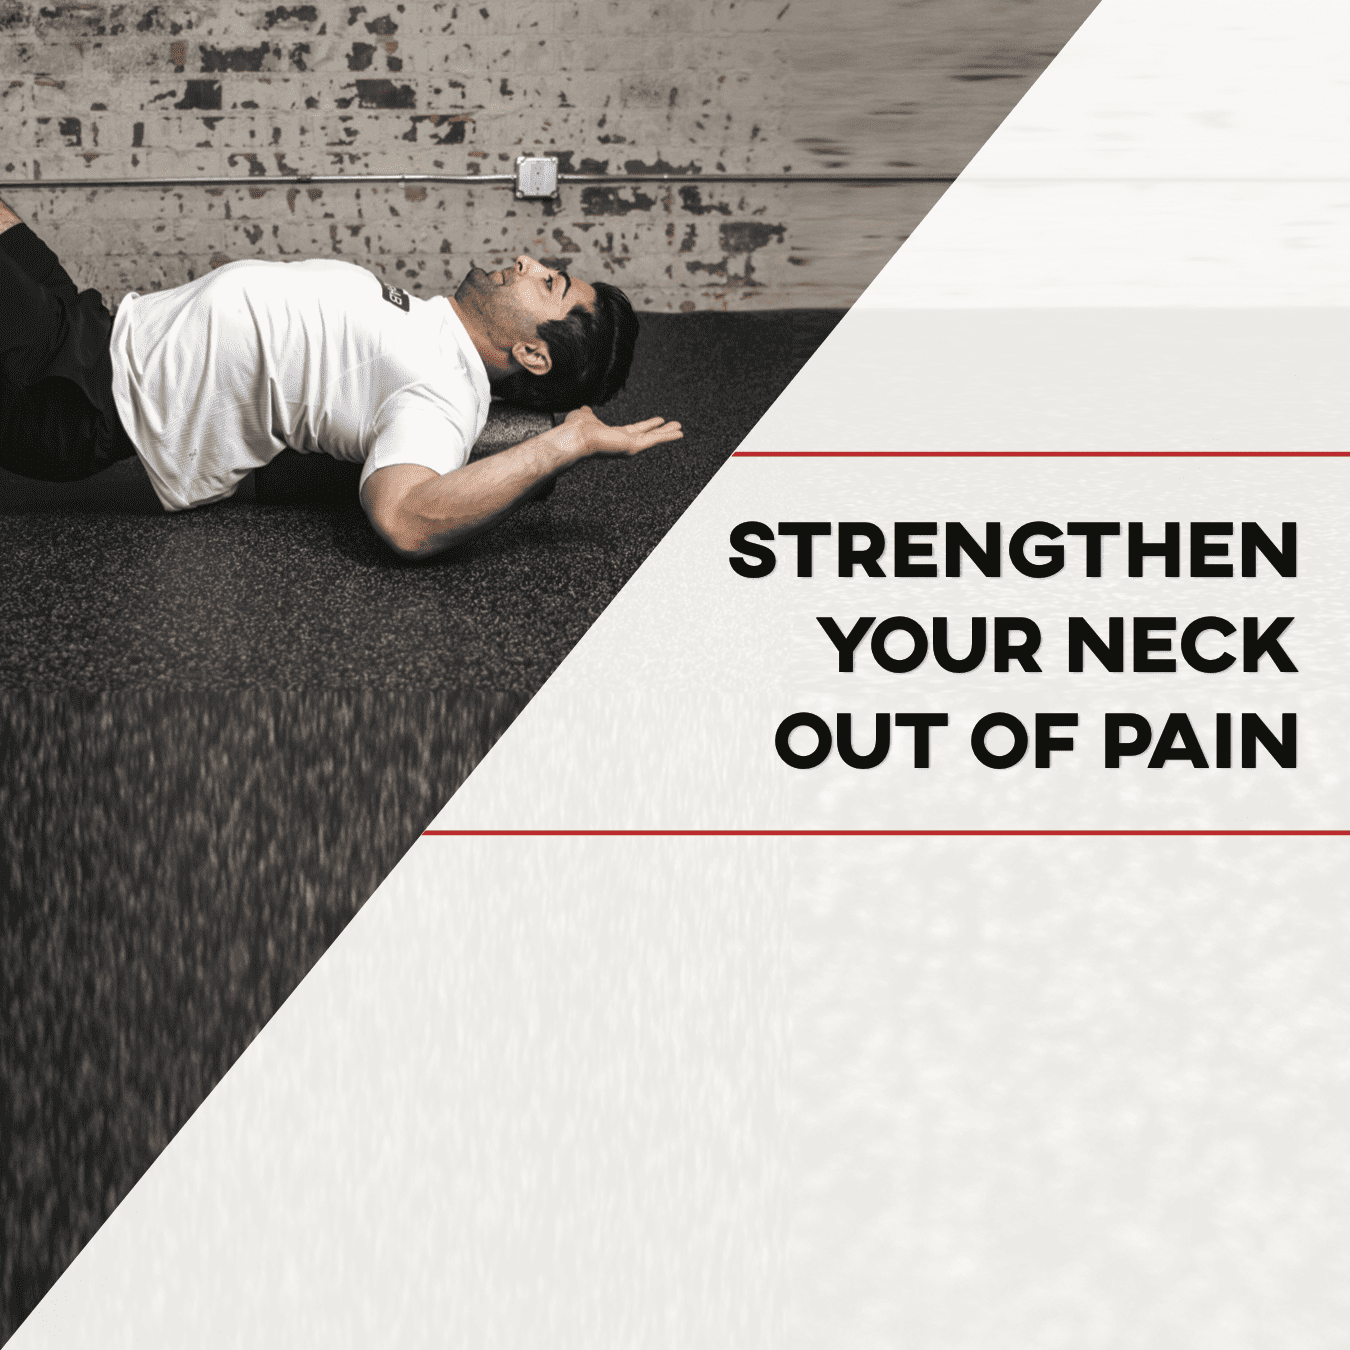 Strengthen Your Neck out of Pain With Prehab Exercises - [P]rehab